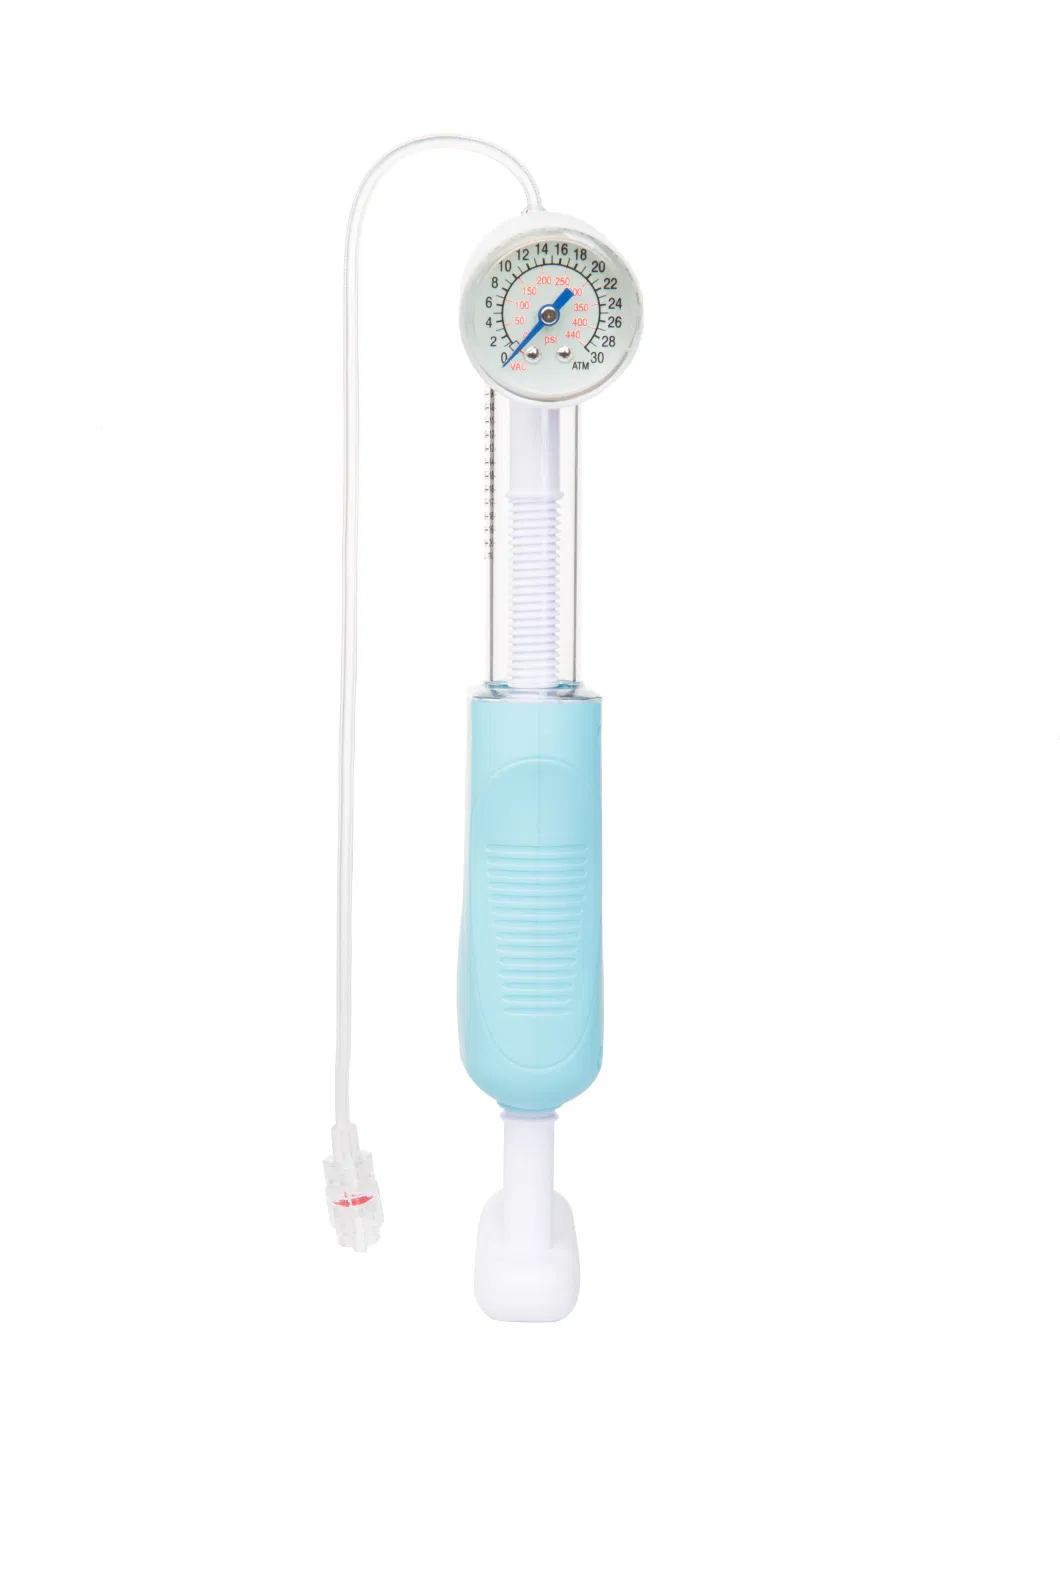 Disposable Medical Balloon Inflation Device with Digital Displayer and Stopcock